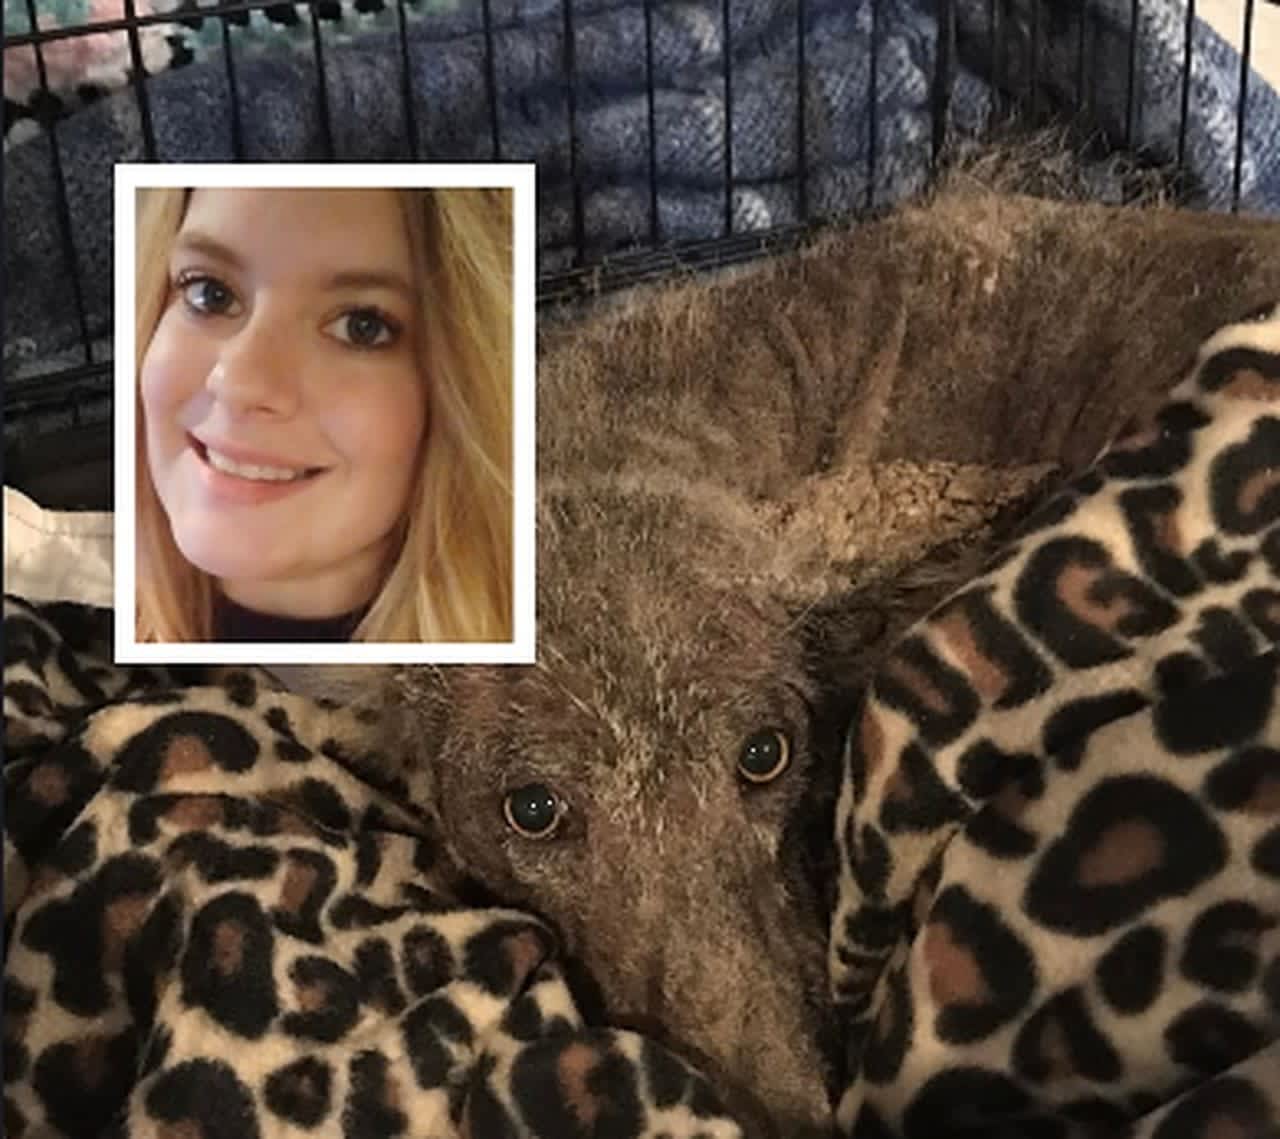 Experts Baffled By Mystery Animal Who Showed Up At PA Woman's Home | Adams  Daily Voice